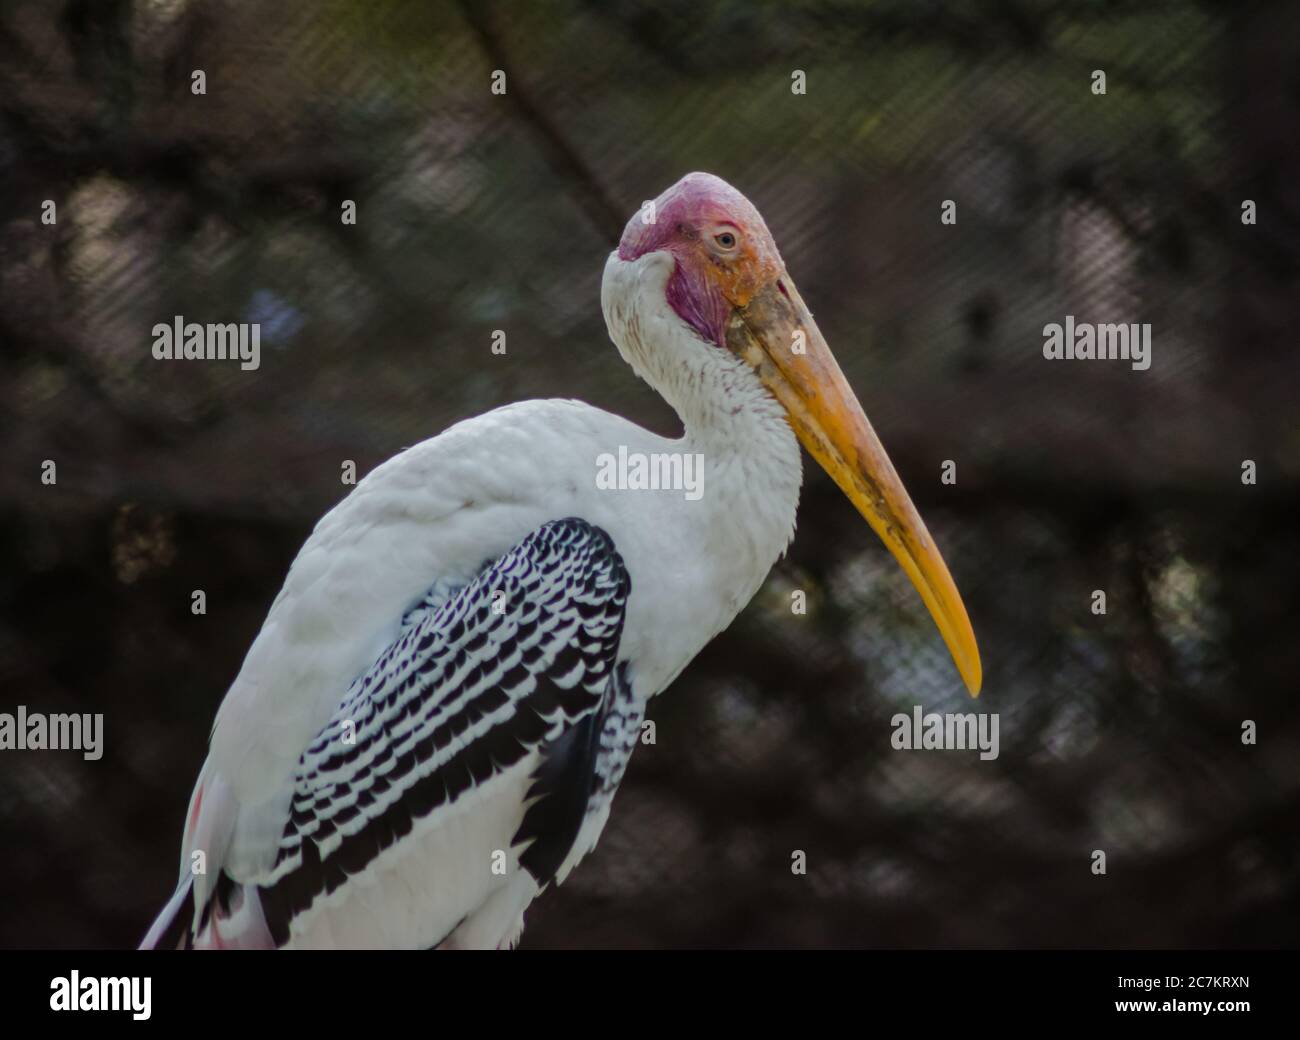 Storks are large, long-legged, long-necked wading birds with long, stout bills. Stock Photo